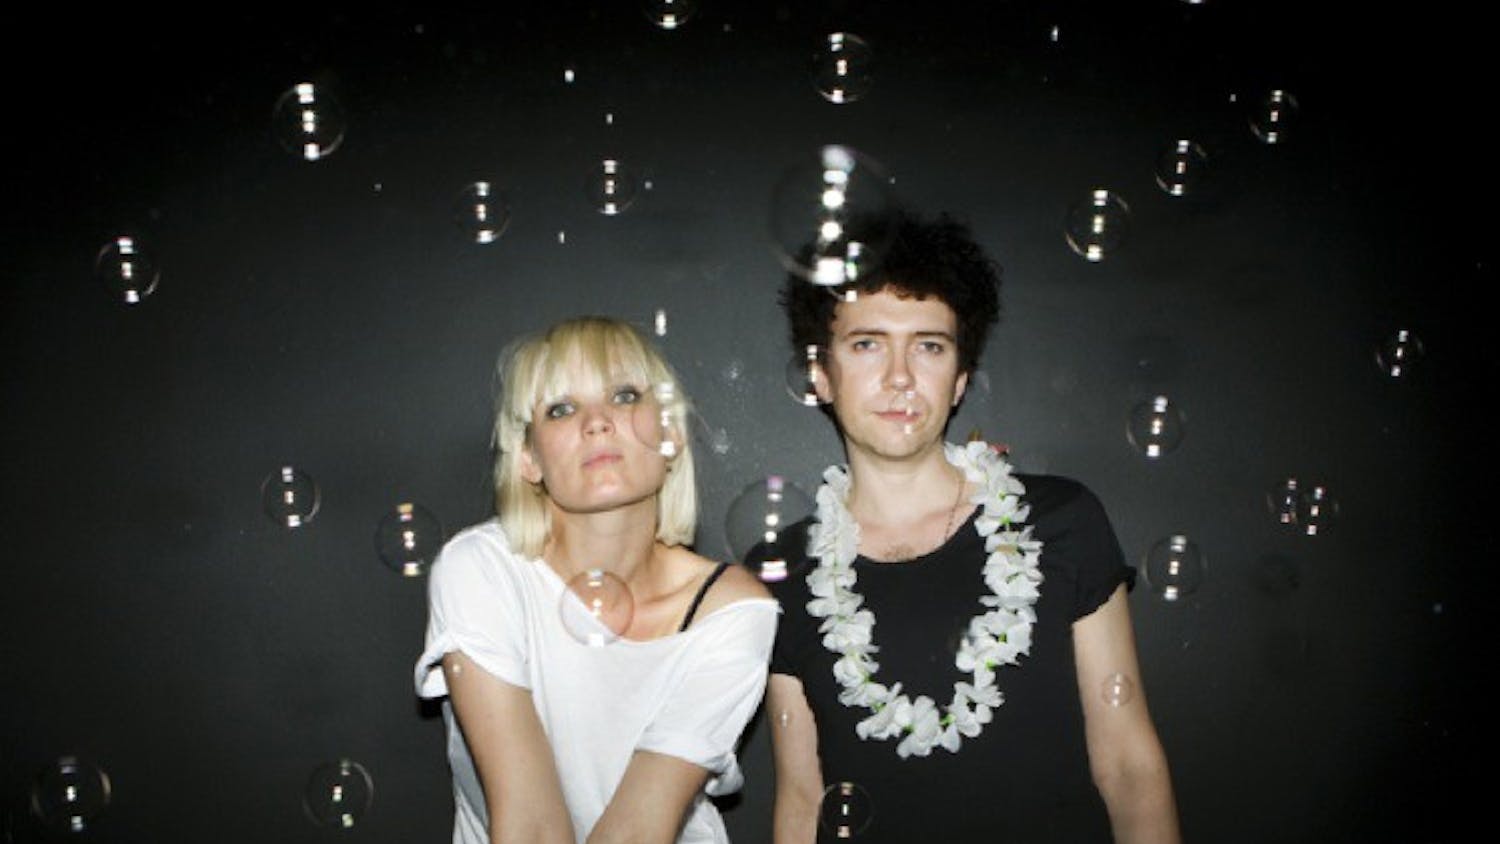 GREAT DANES â€” The Raveonettes, a rock duo consisting of Sune Rose Wagner and Sharin Foo, are now on the road promoting their latest album, â€œIn and Out of Control.â€ This is their fourth studio album since their debut in 2003. The band will be performing at the 9:30 club on Oct. 16.